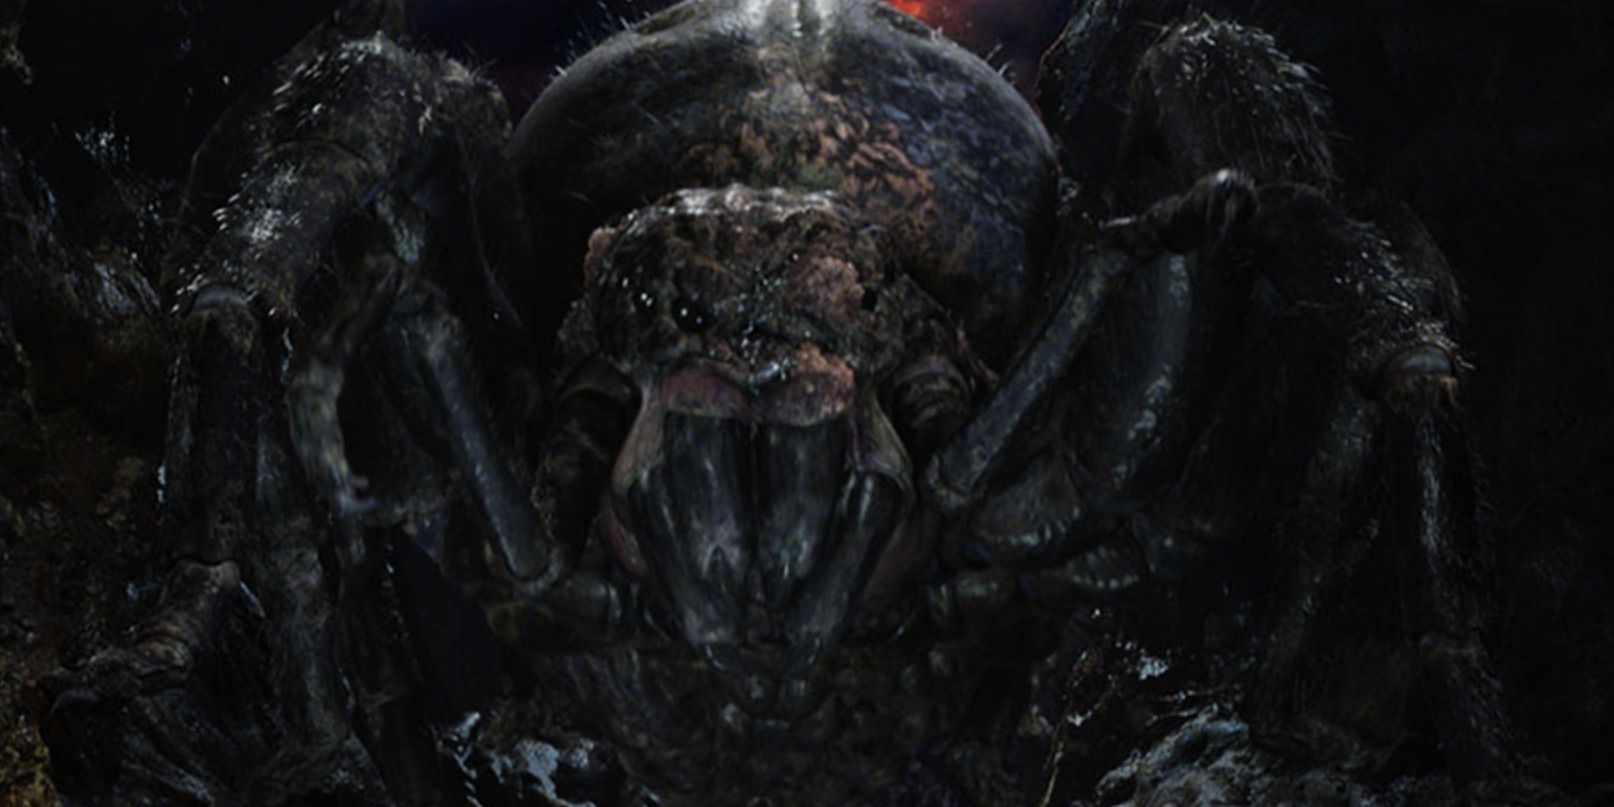 Giant spider Shelob in Lord of the Rings.